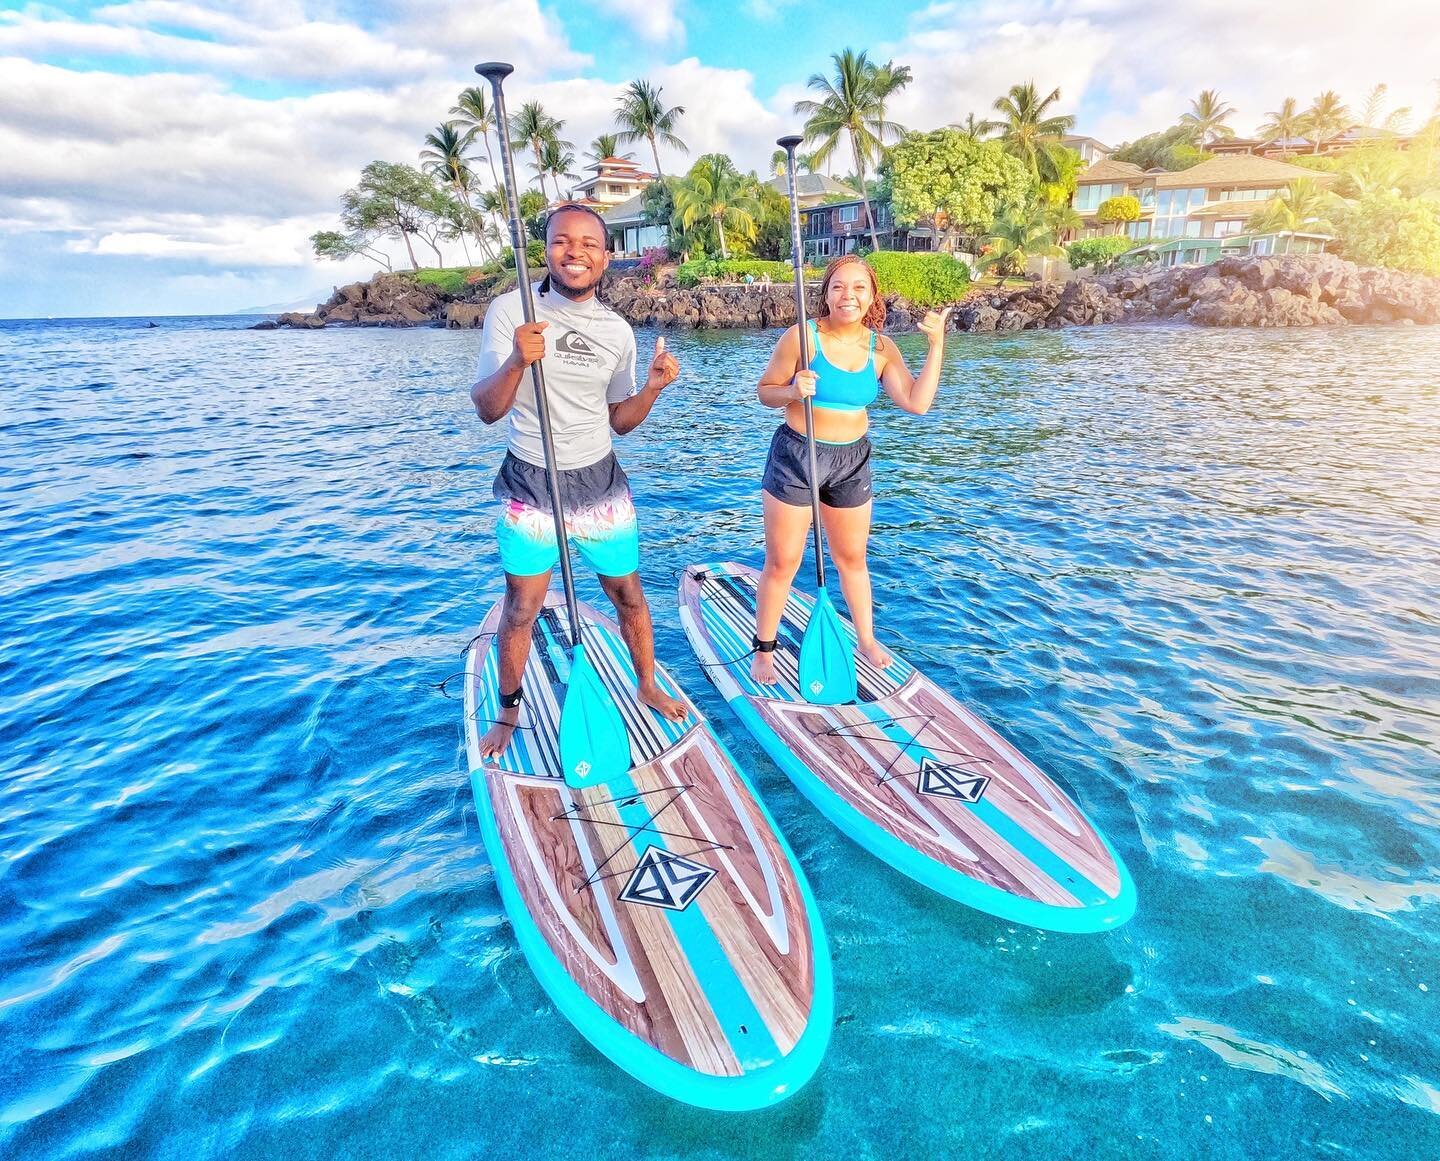 🌴Amazing to see these familiar faces again!! Rickey &amp; Sierra came out paddle boarding with me a little over a year ago. They are back again this week for their honeymoon. Congrats you two!!! 🍾🥳

#maui #mauihawaii #hawaii #mauiactivities #mauiv